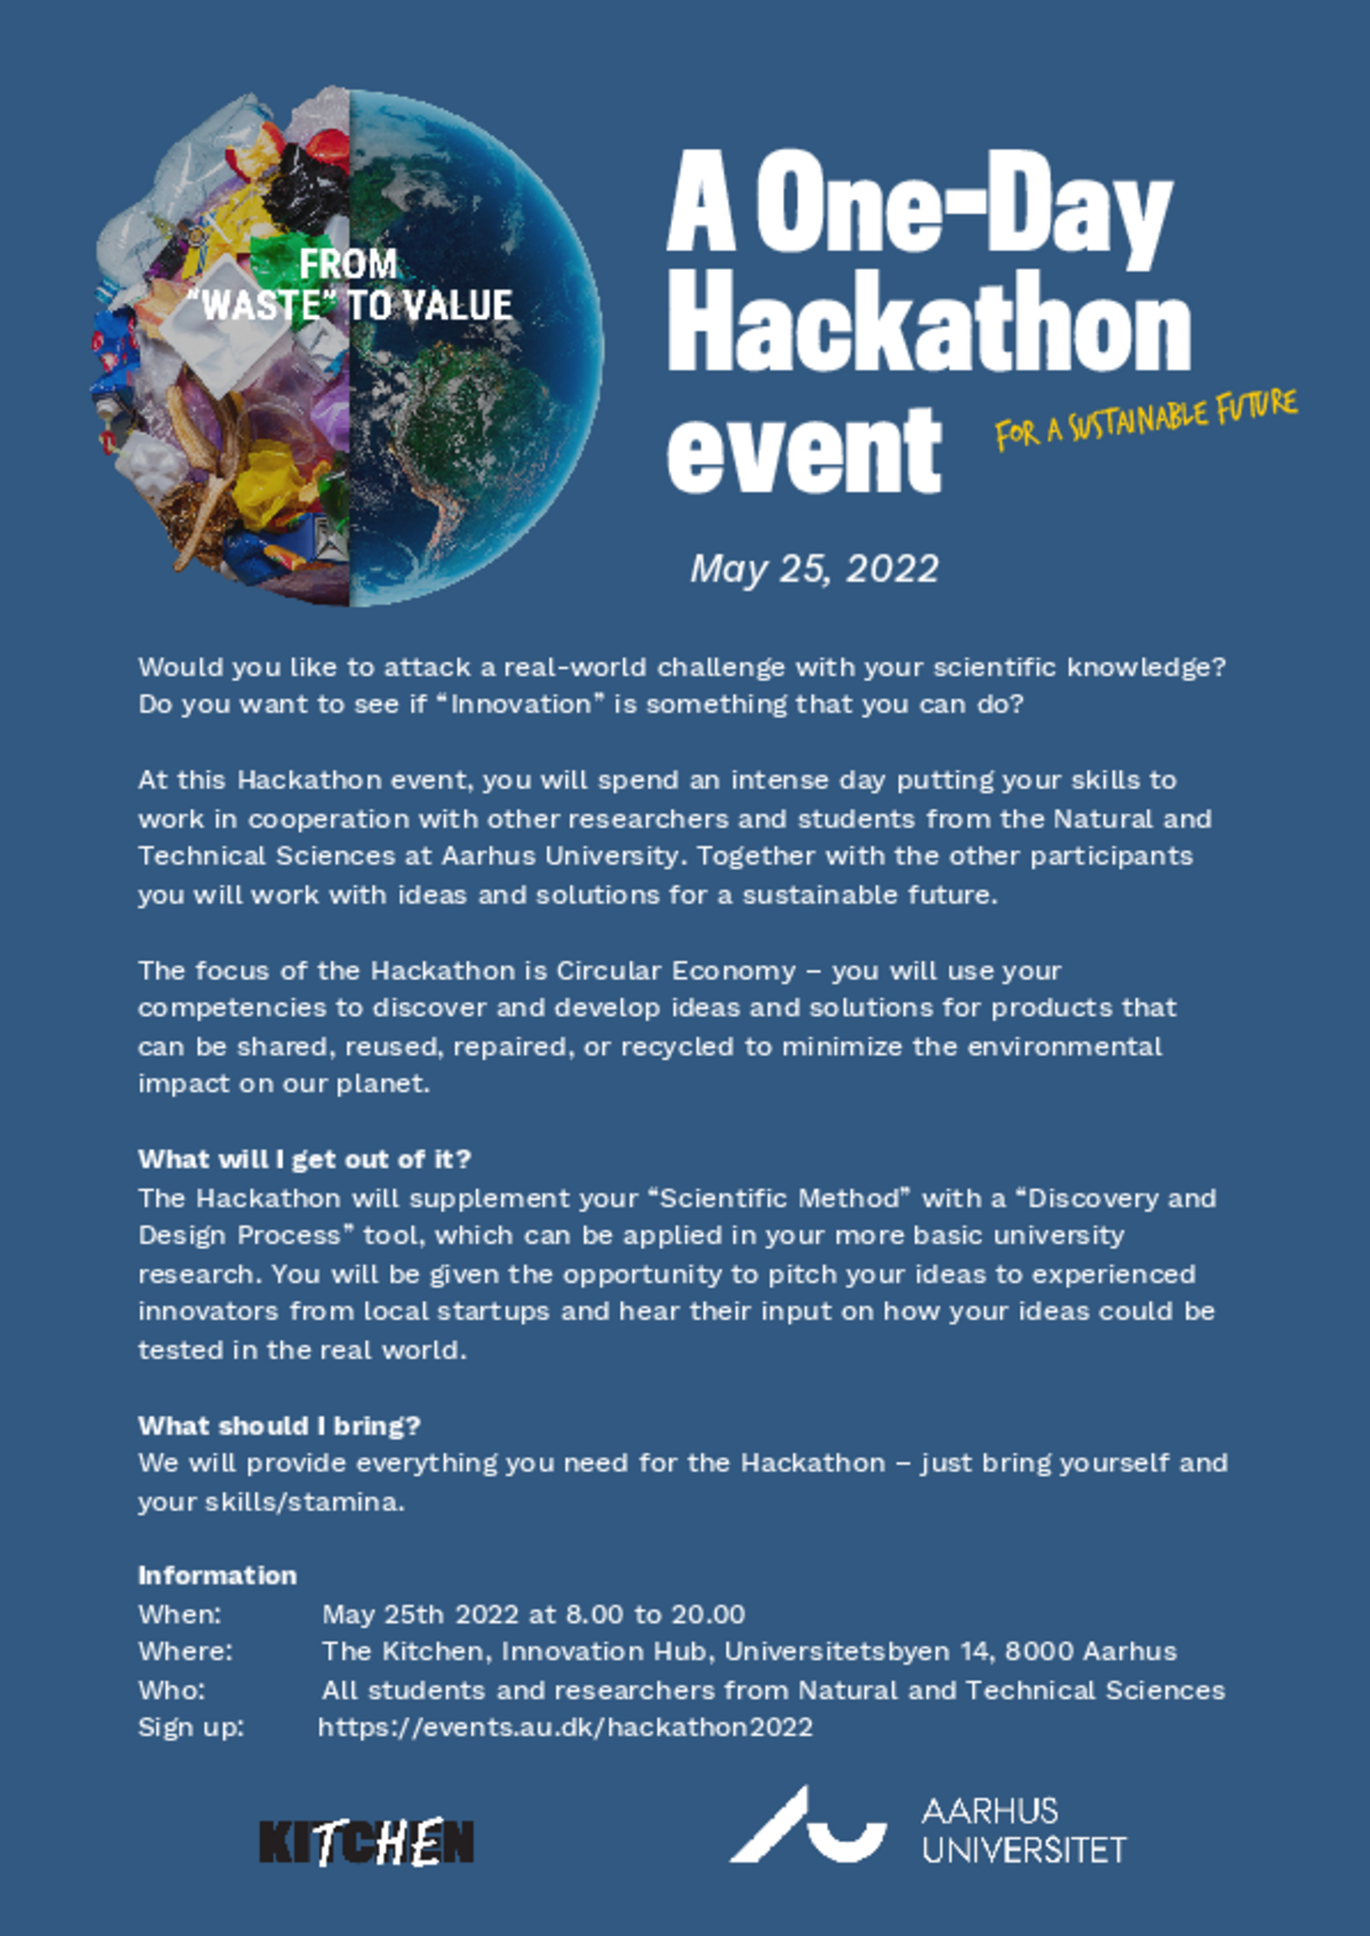 Hackaton Event (for a sustainable future)